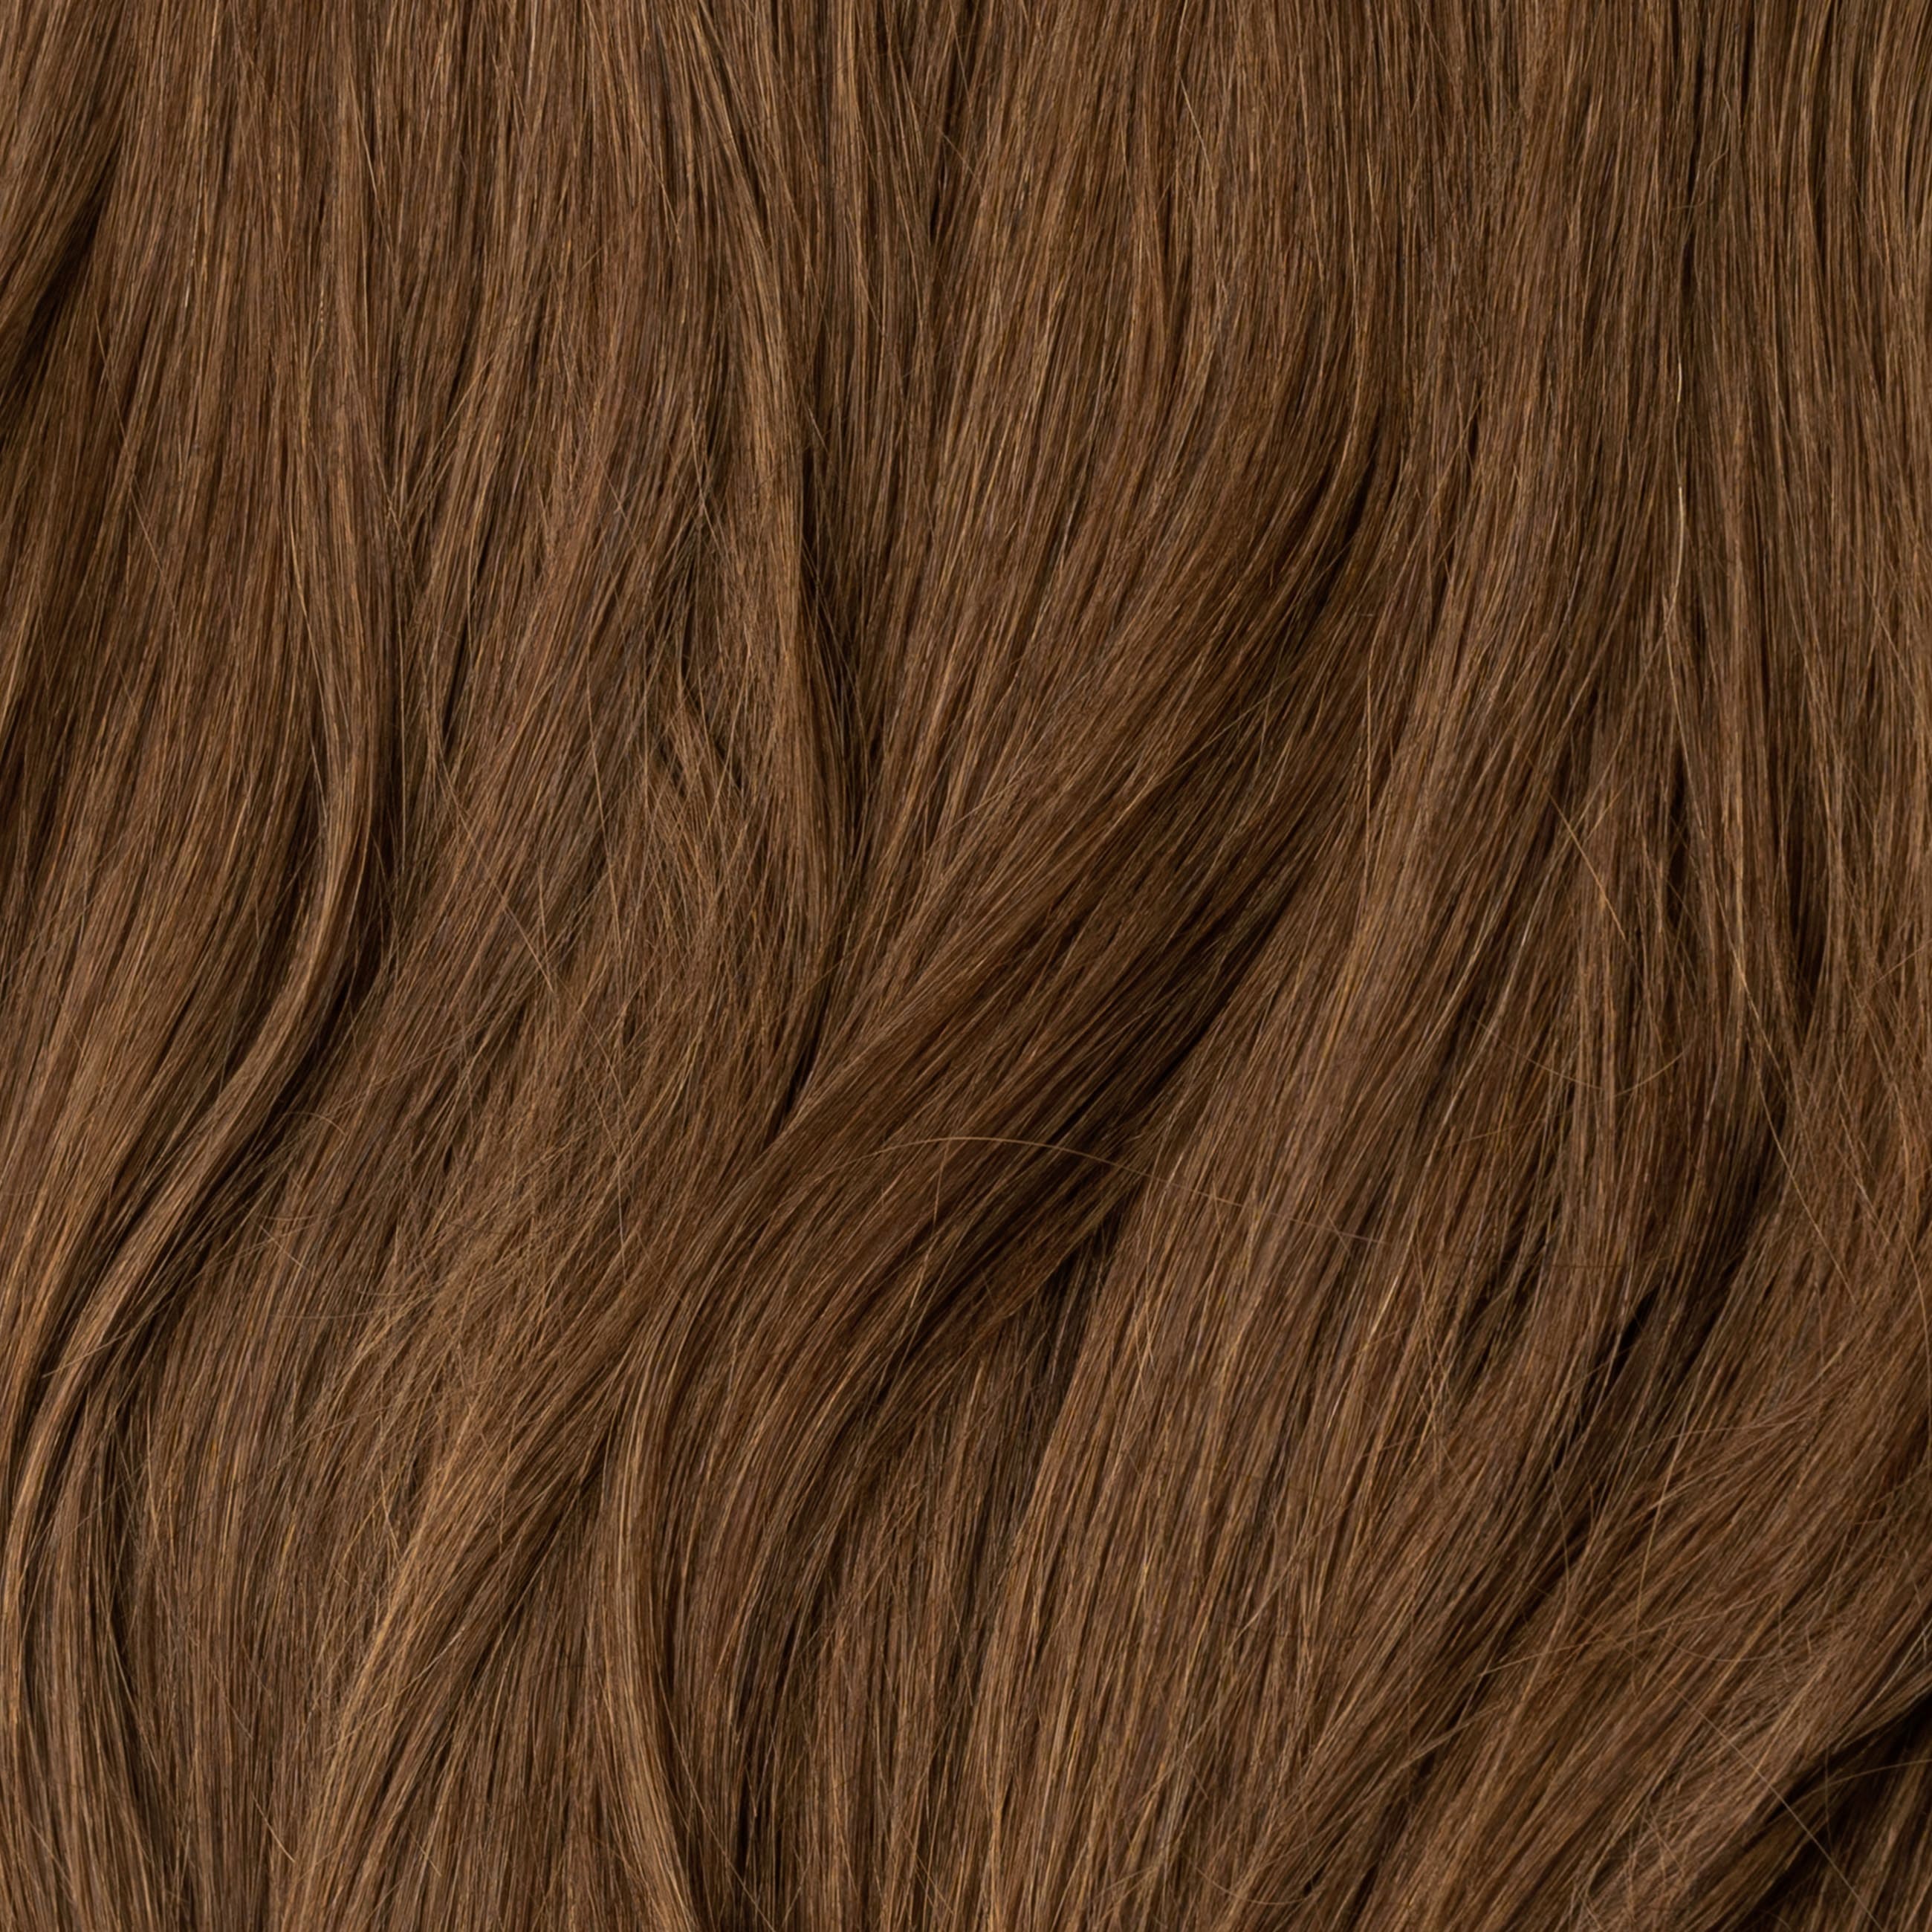 Invisible weft - Natural Brown 3